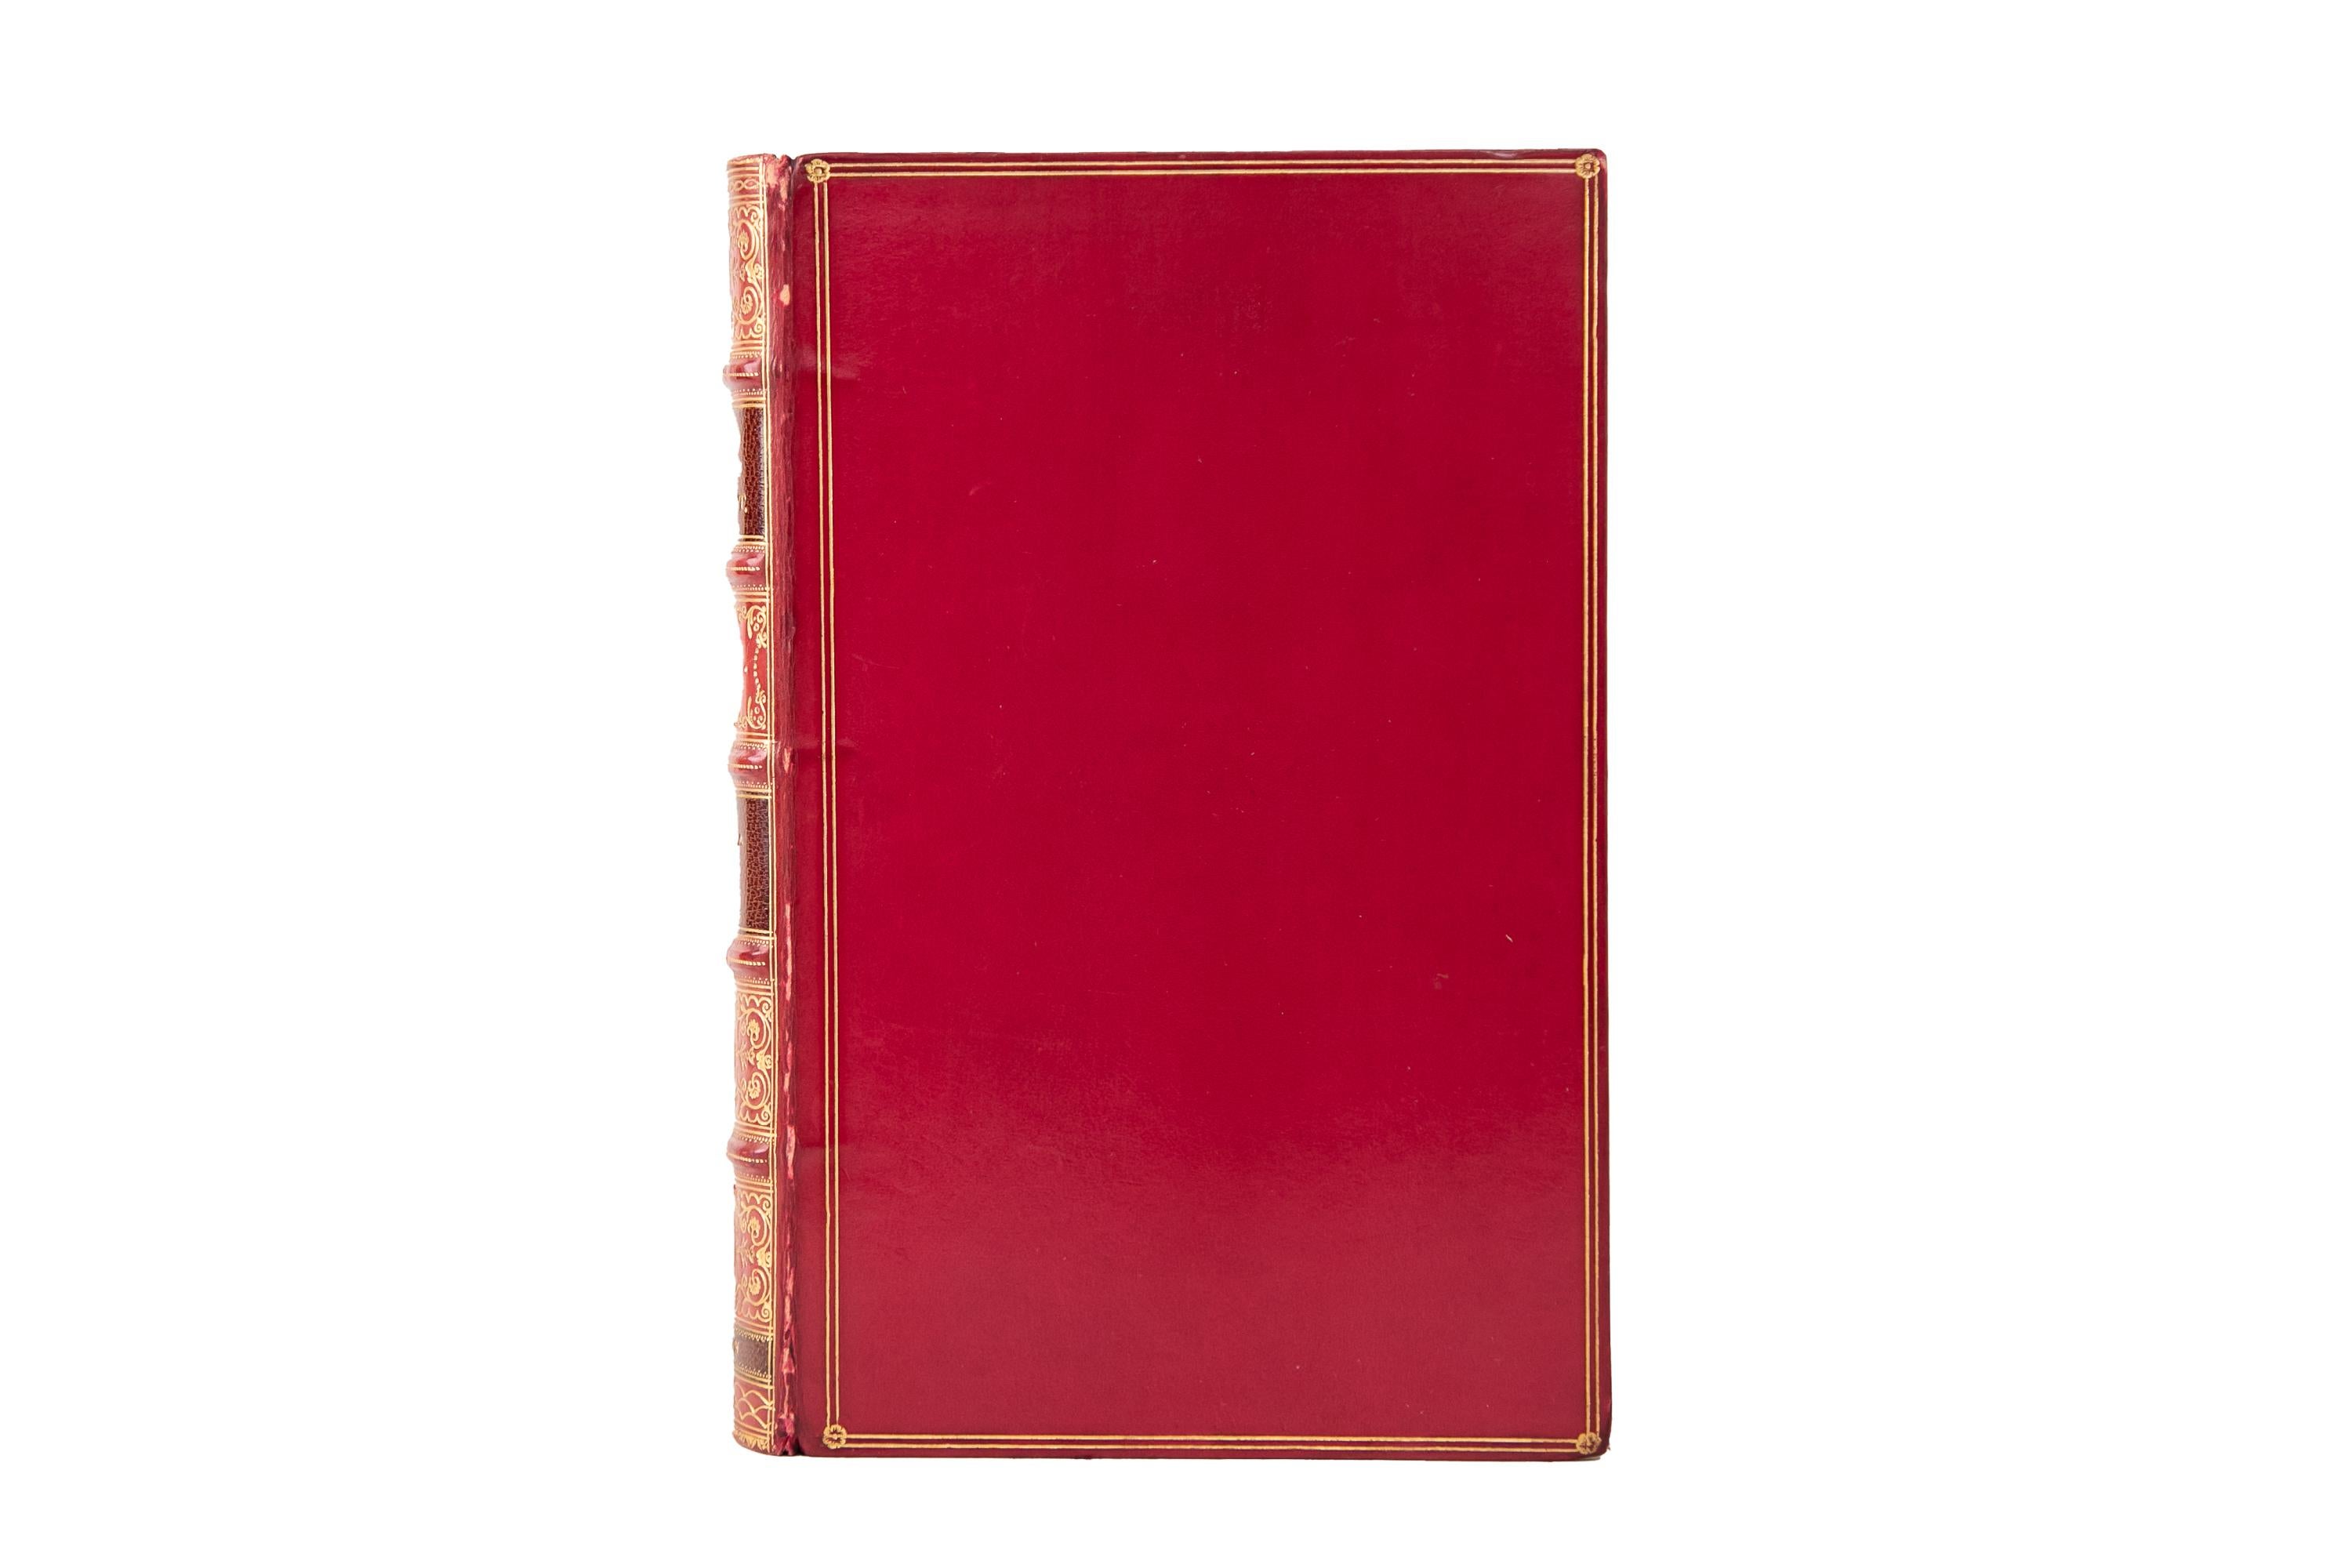 24 Volumes. George Eliot, The Works. Cabinet Edition. Bound by Tout in full red calf with a gilt-tooled border on the covers. Raised band spines with ornate gilt-tooled details, brown morocco labels, and a green morocco circle displaying the volume